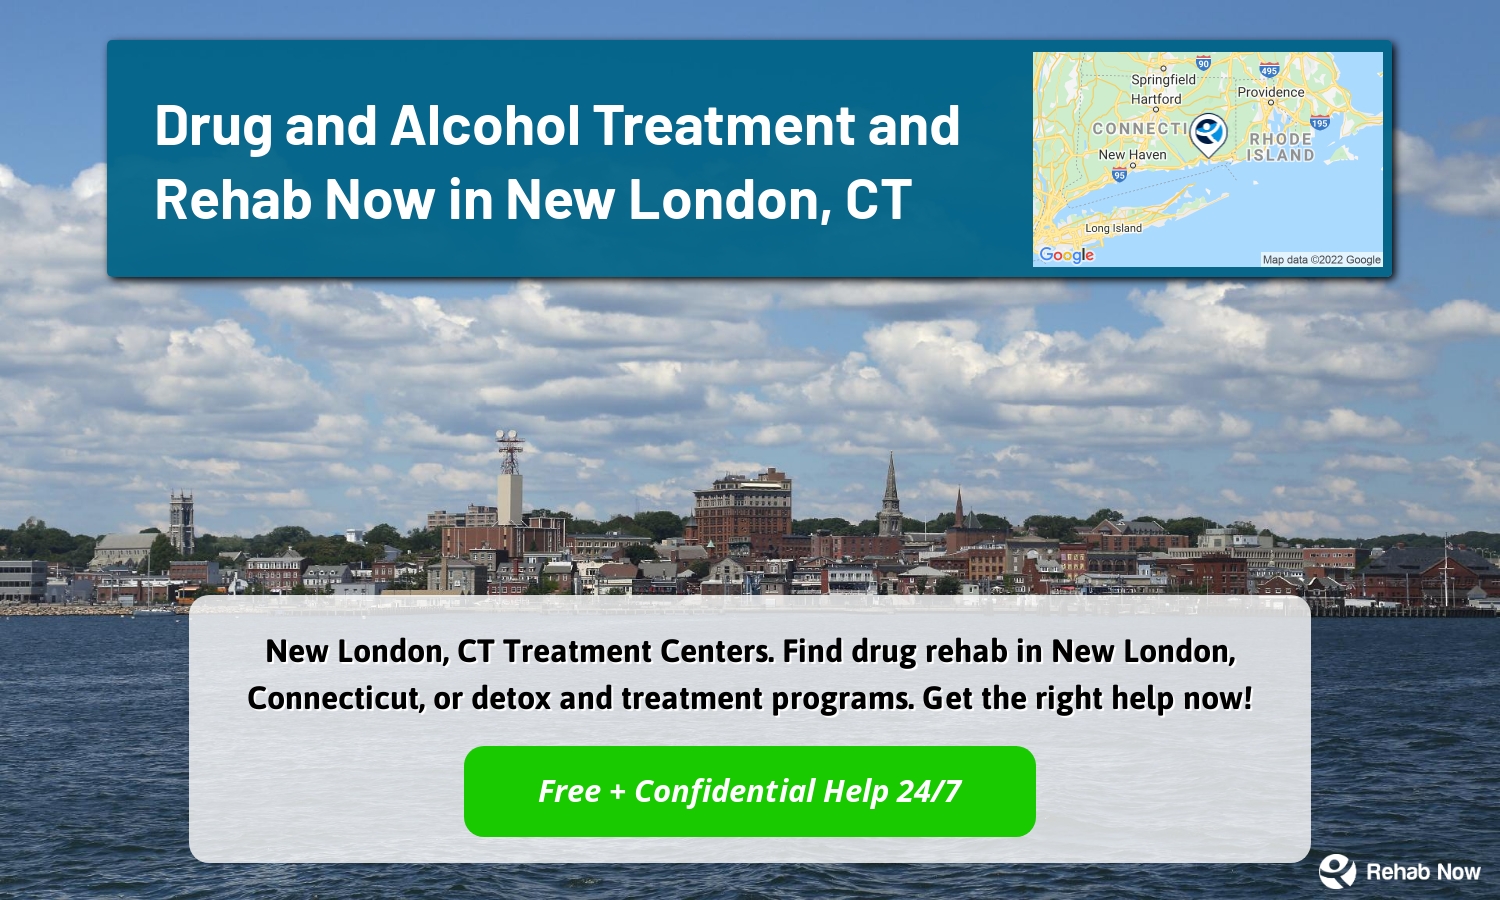 New London, CT Treatment Centers. Find drug rehab in New London, Connecticut, or detox and treatment programs. Get the right help now!